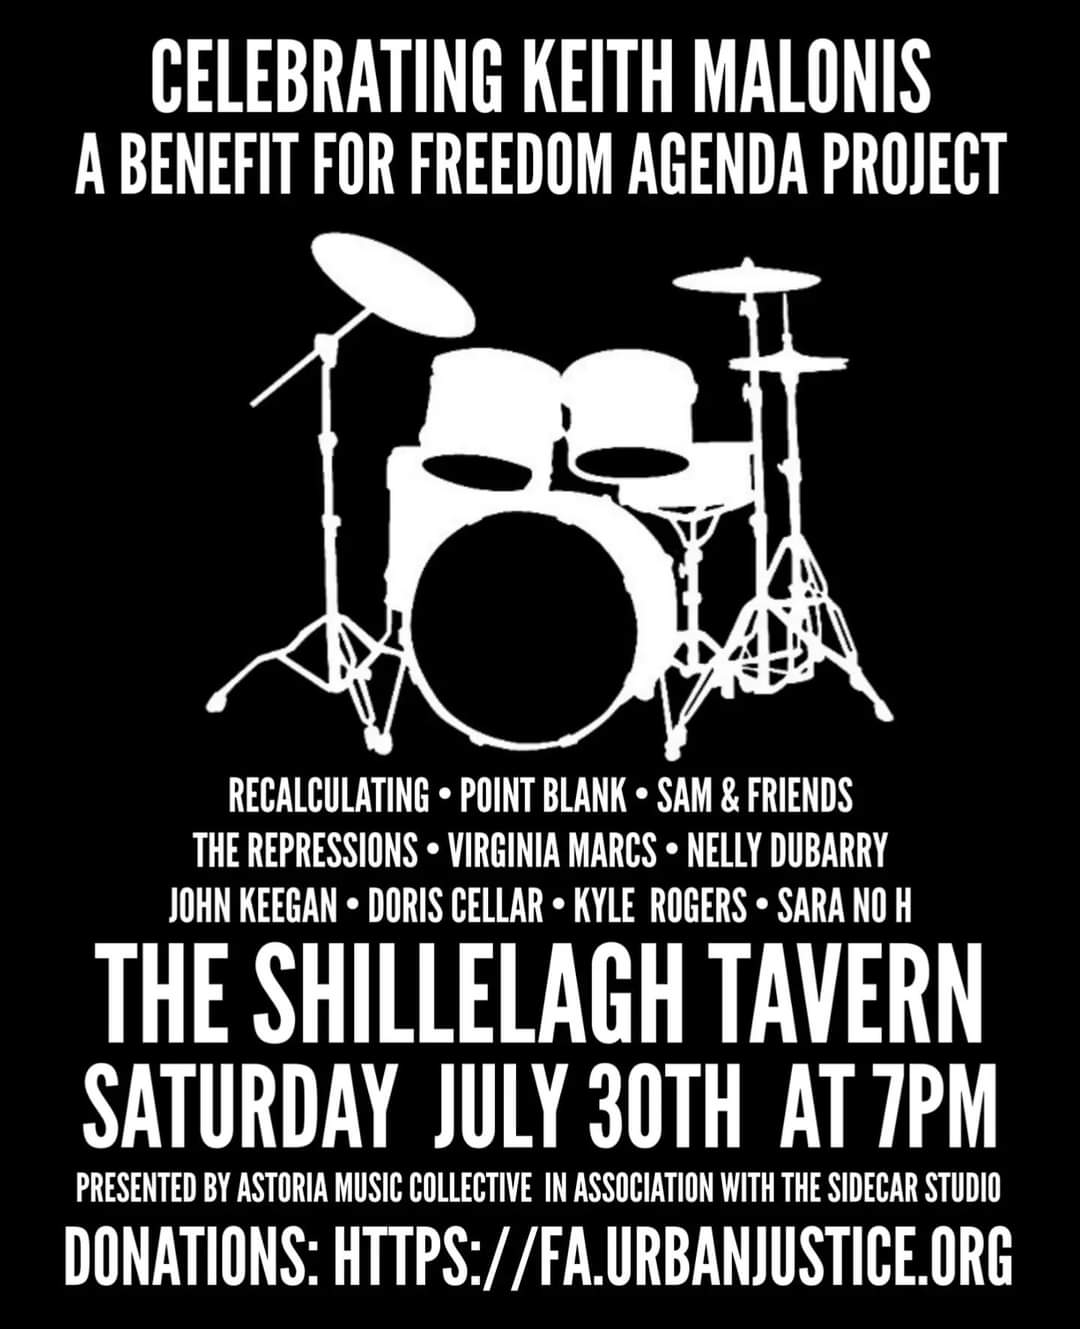 Celebrating Keith Malonis: A Benefit for Freedom Agenda Project at The Shillelagh Tavern, July 30, 2022